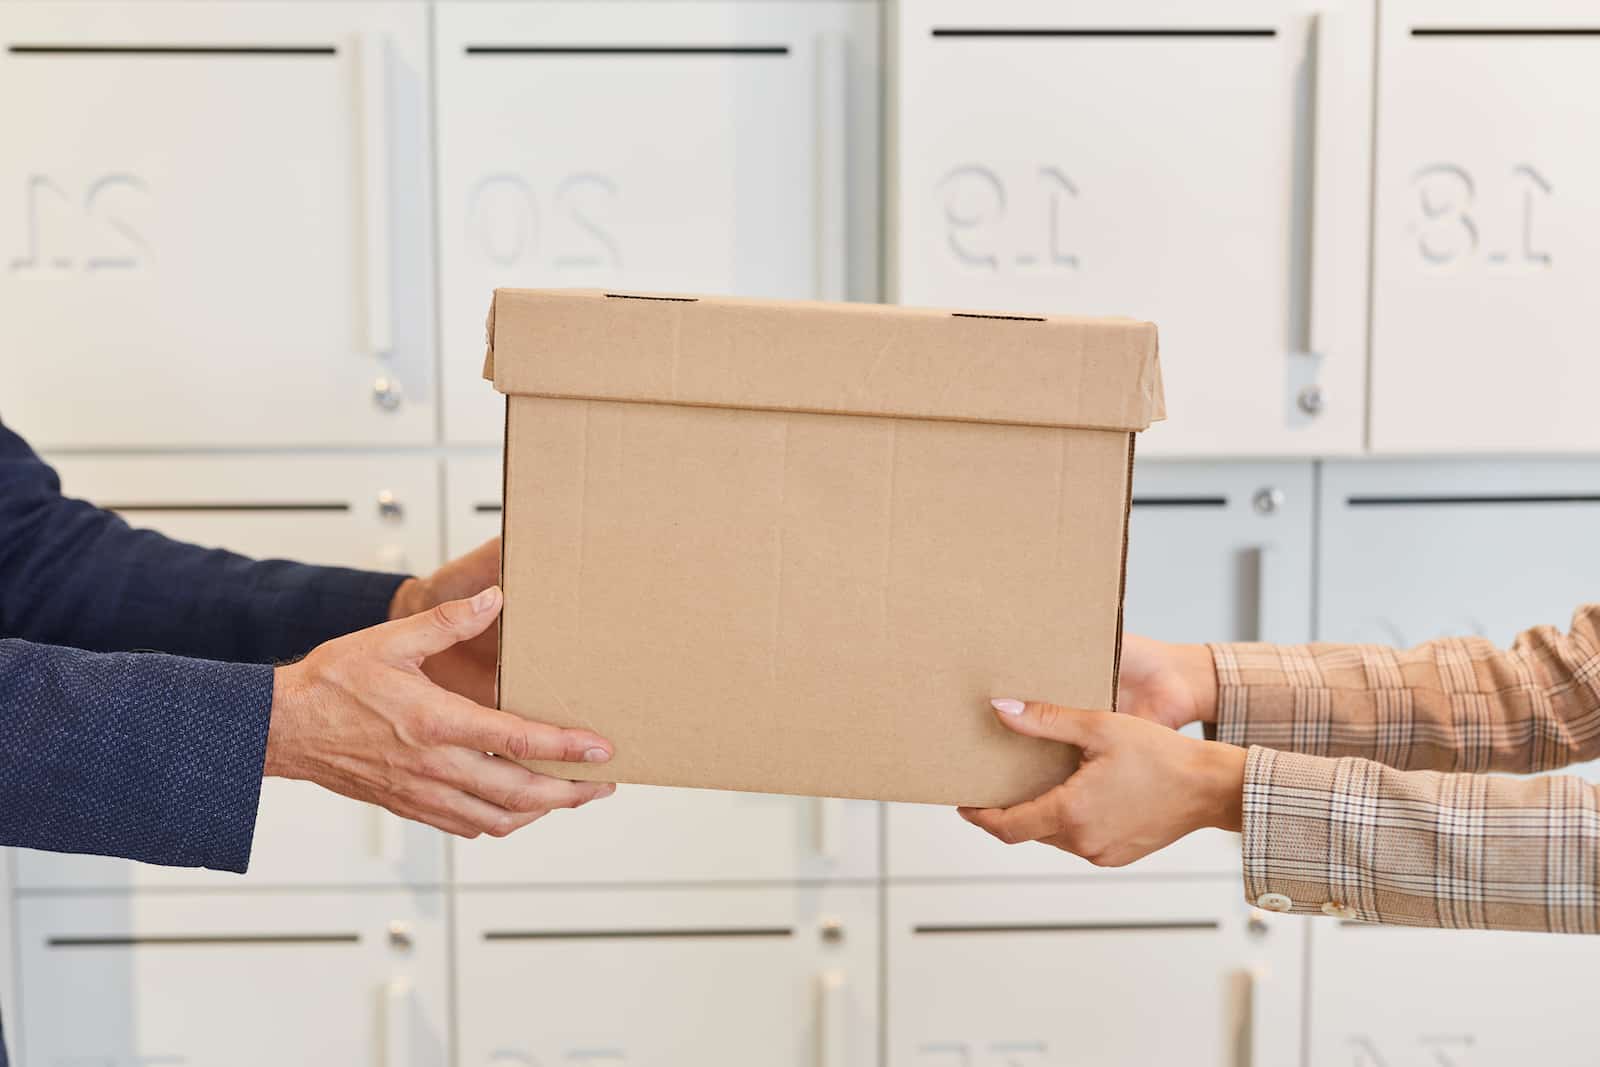 Two sets of hands holding a delivery box at the same time